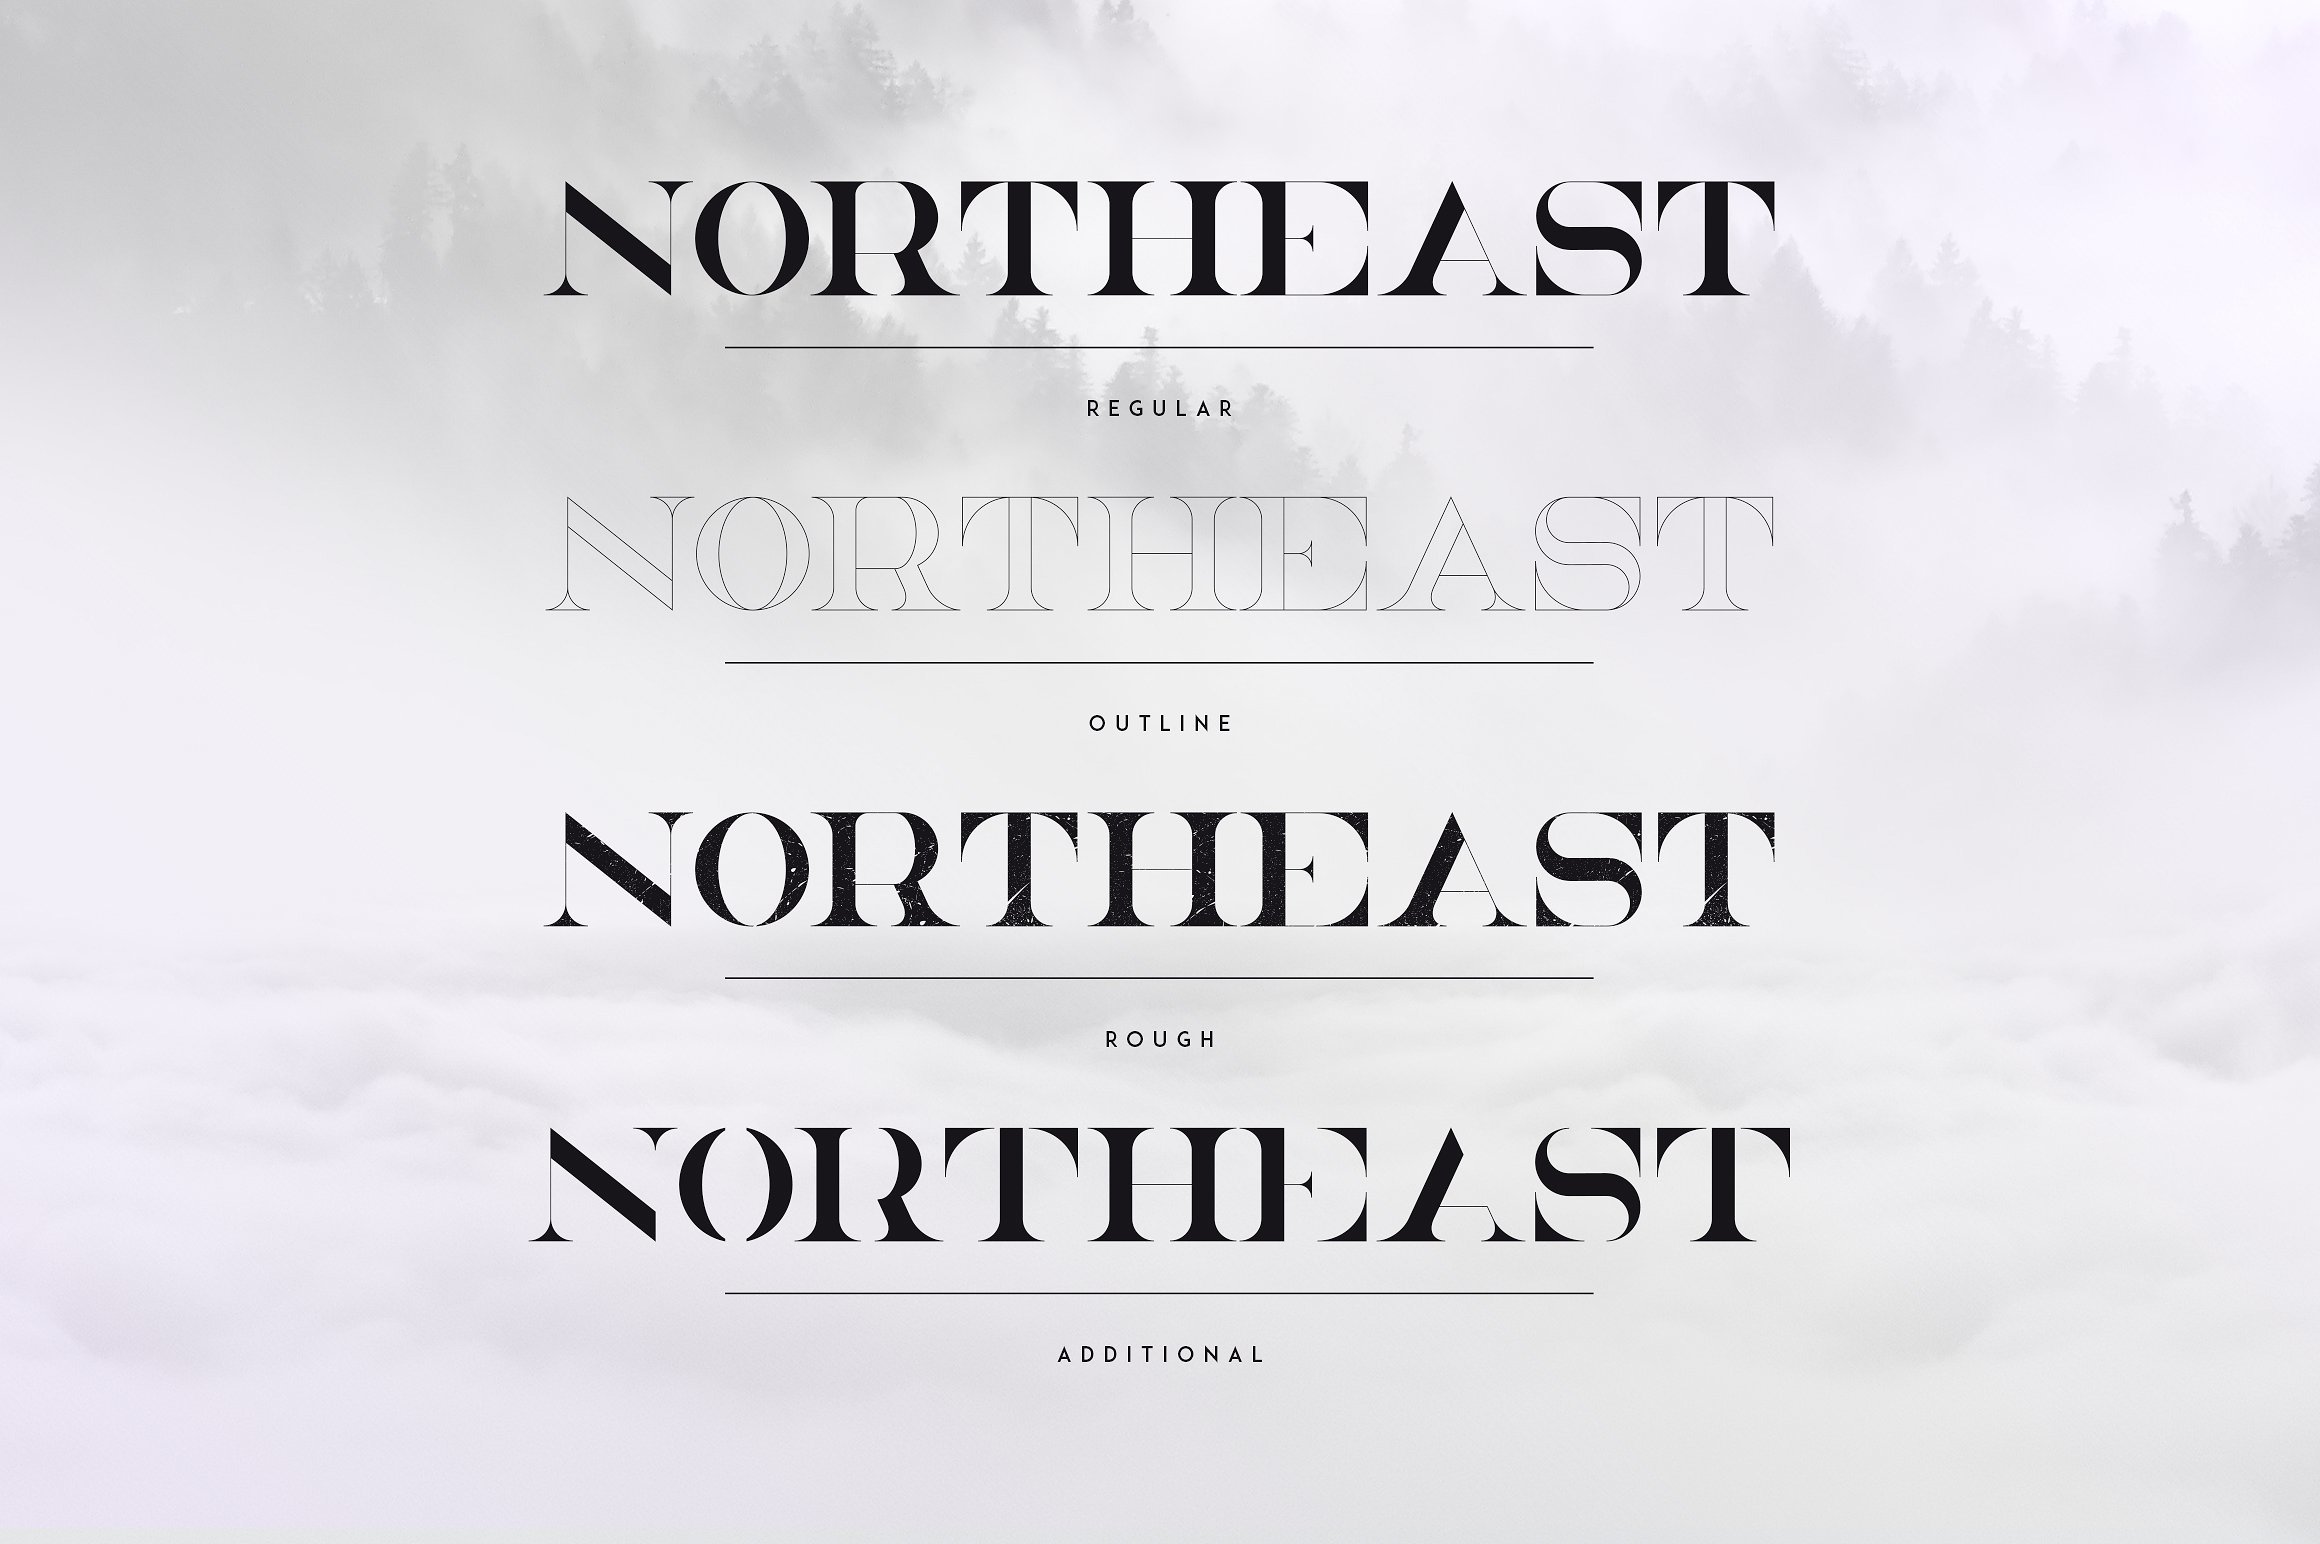 North East